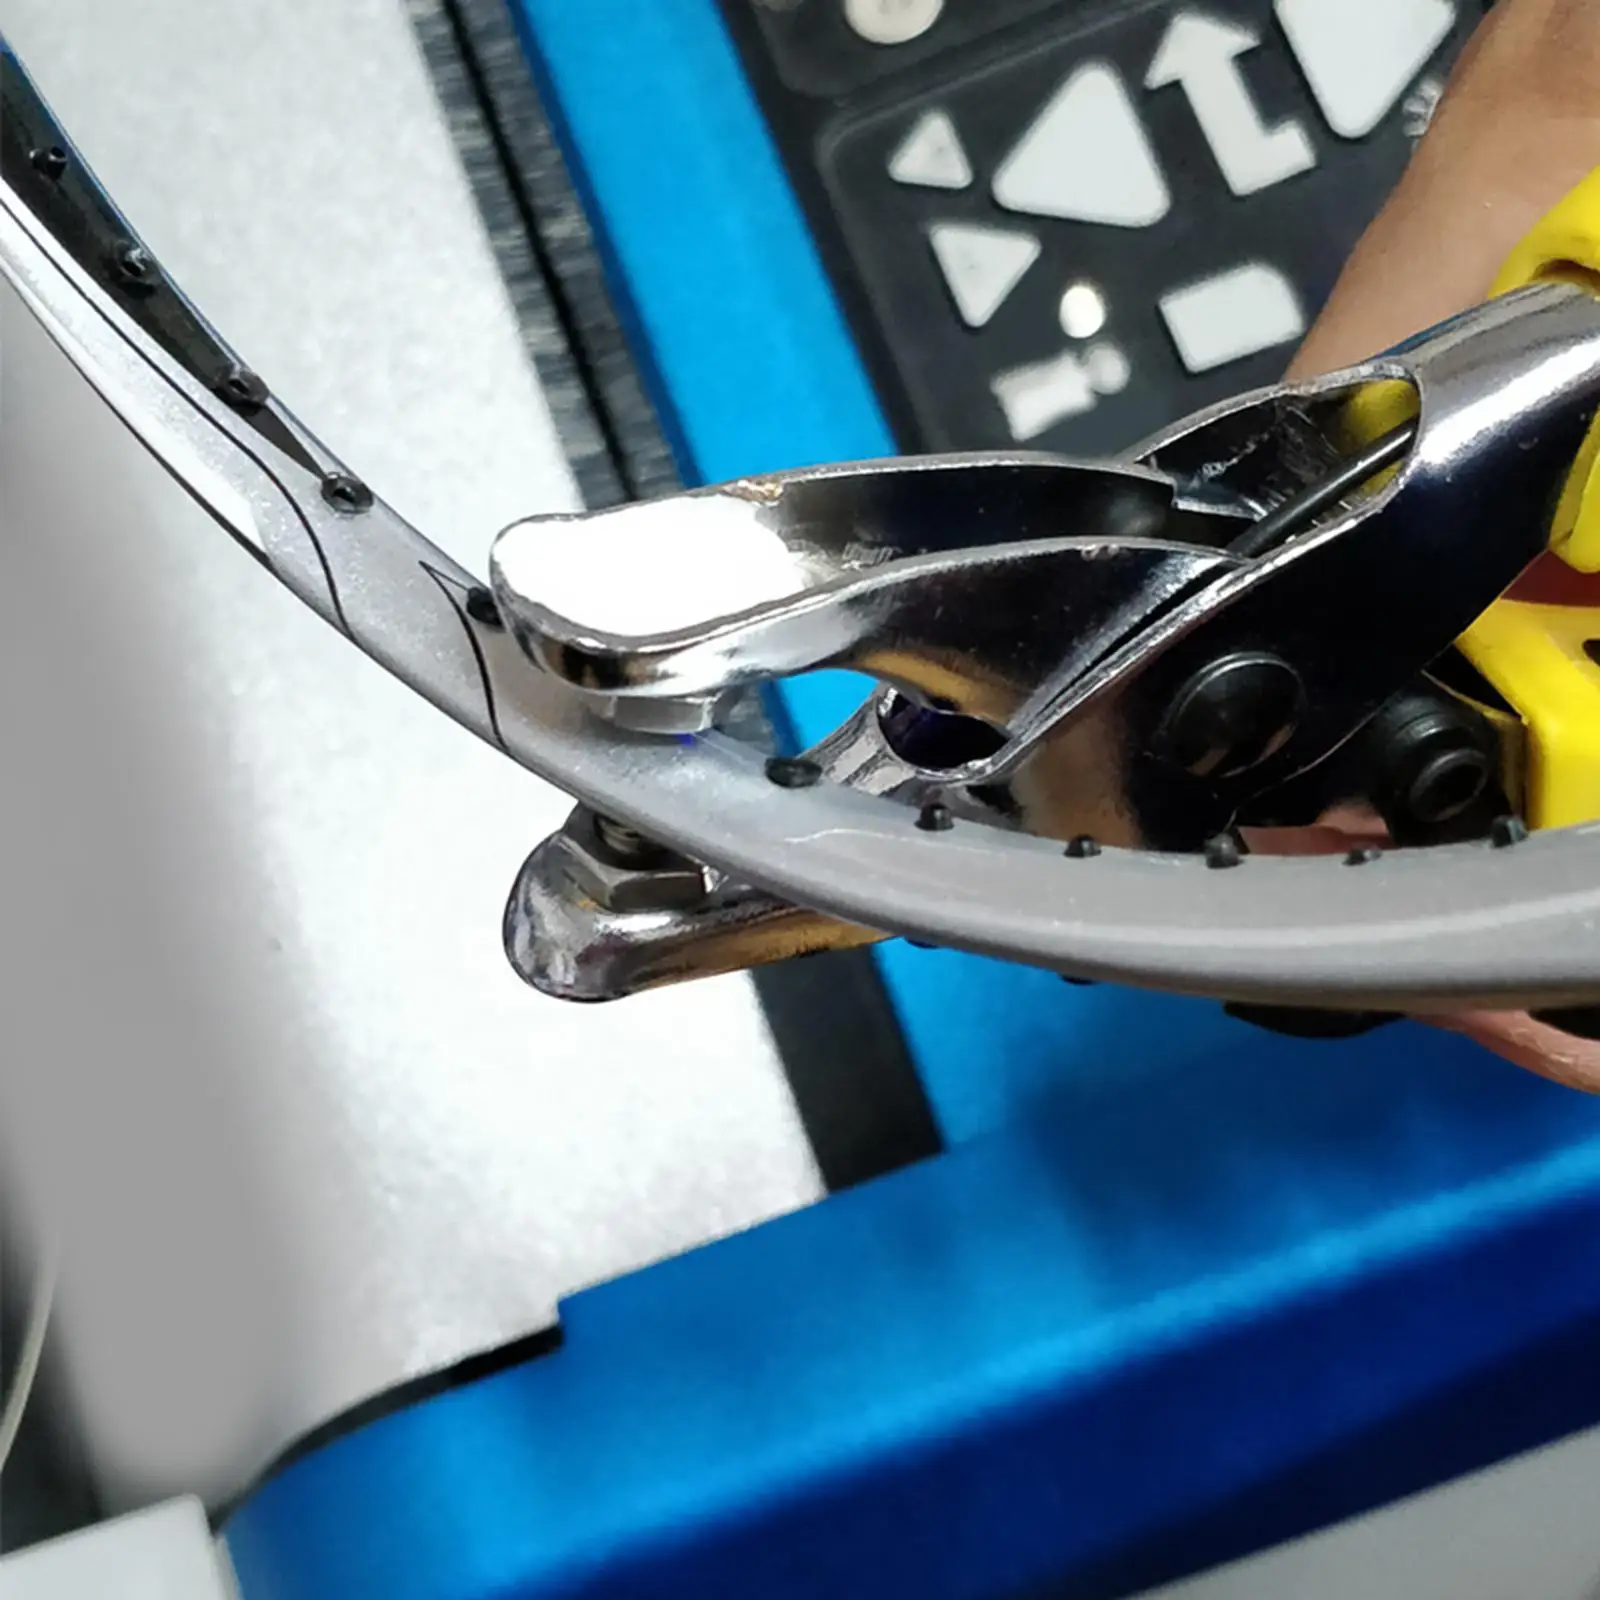 Durable Pliers for Badminton Racket, String Clamp Grommet Tool, Racquet Racket Threading Pincer Forceps Equipment